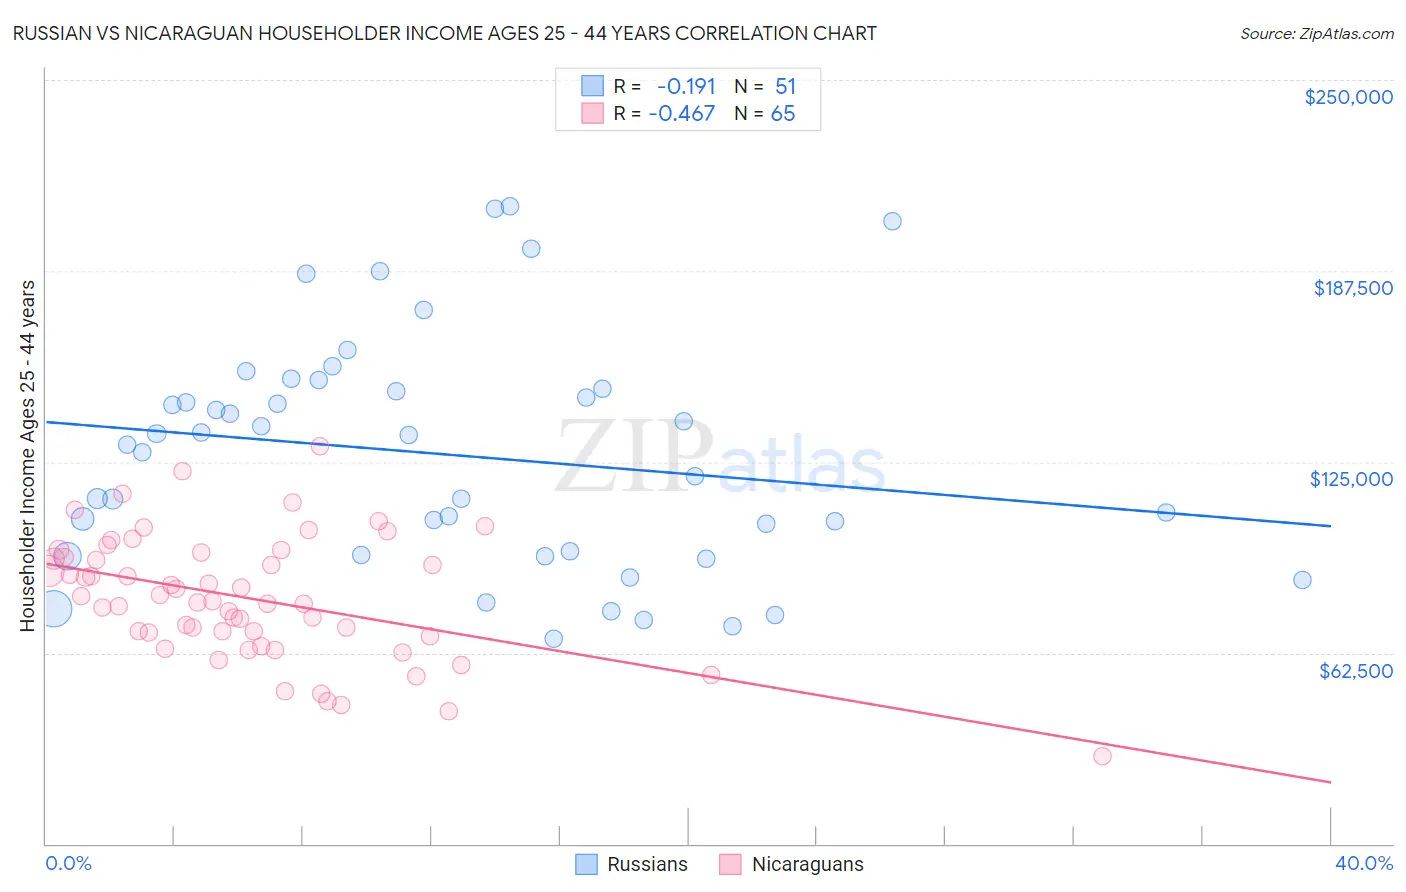 Russian vs Nicaraguan Householder Income Ages 25 - 44 years